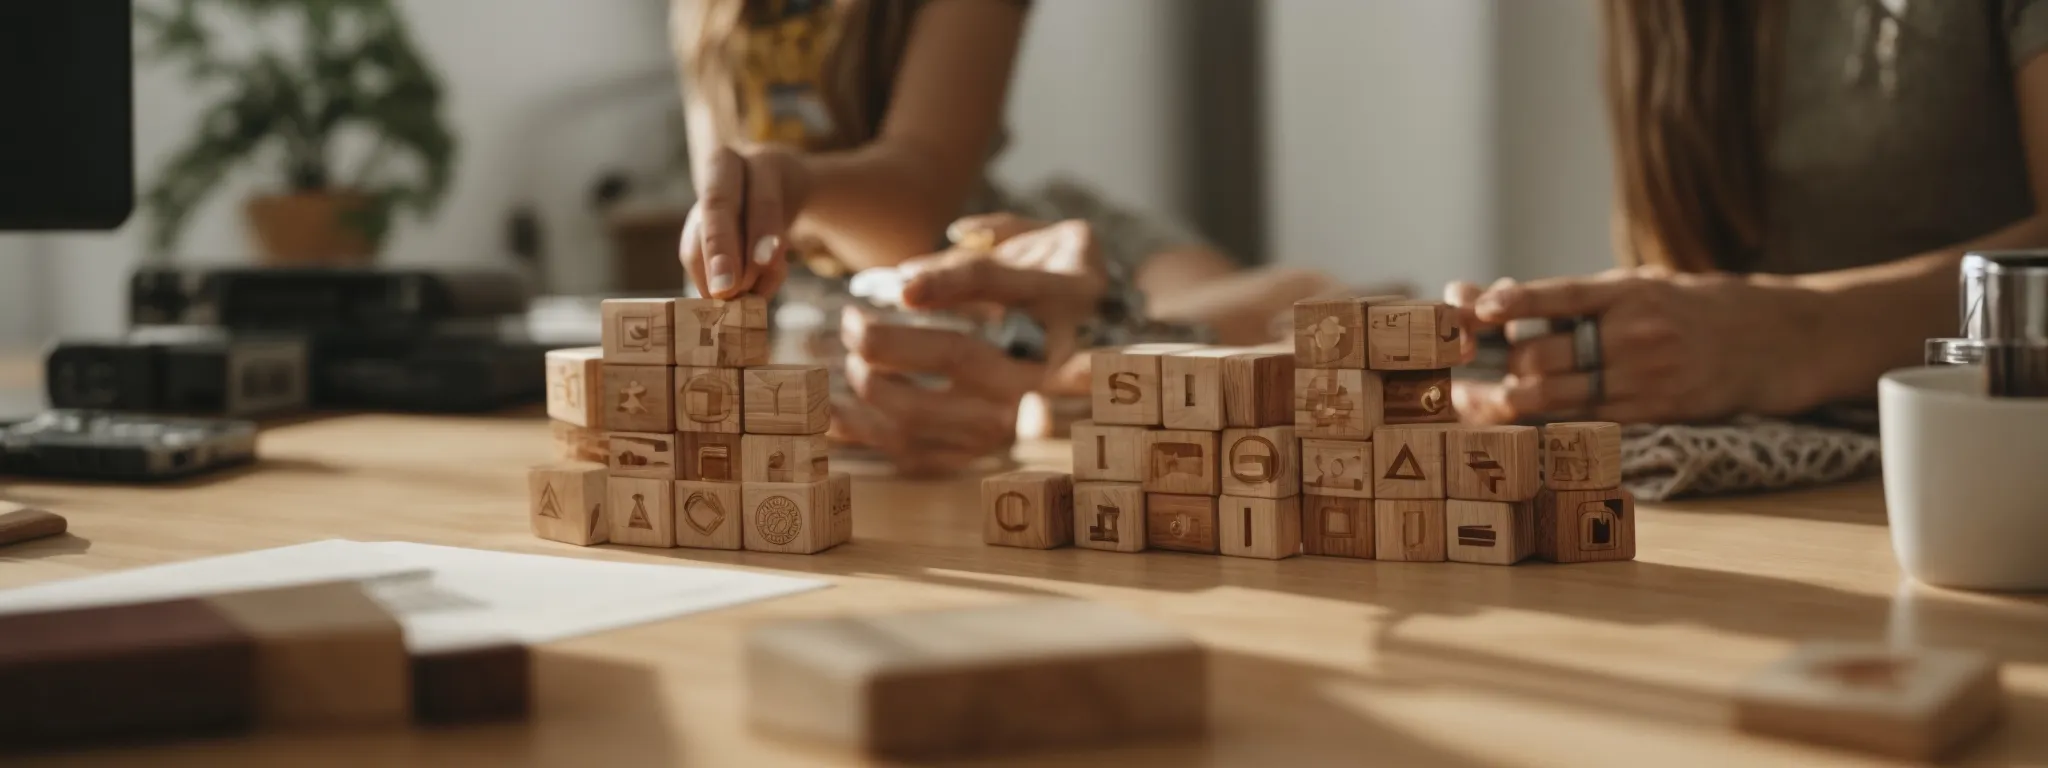 a person thoughtfully arranging wooden blocks with seo-related icons into a pyramid structure on a clean, well-lit desk.